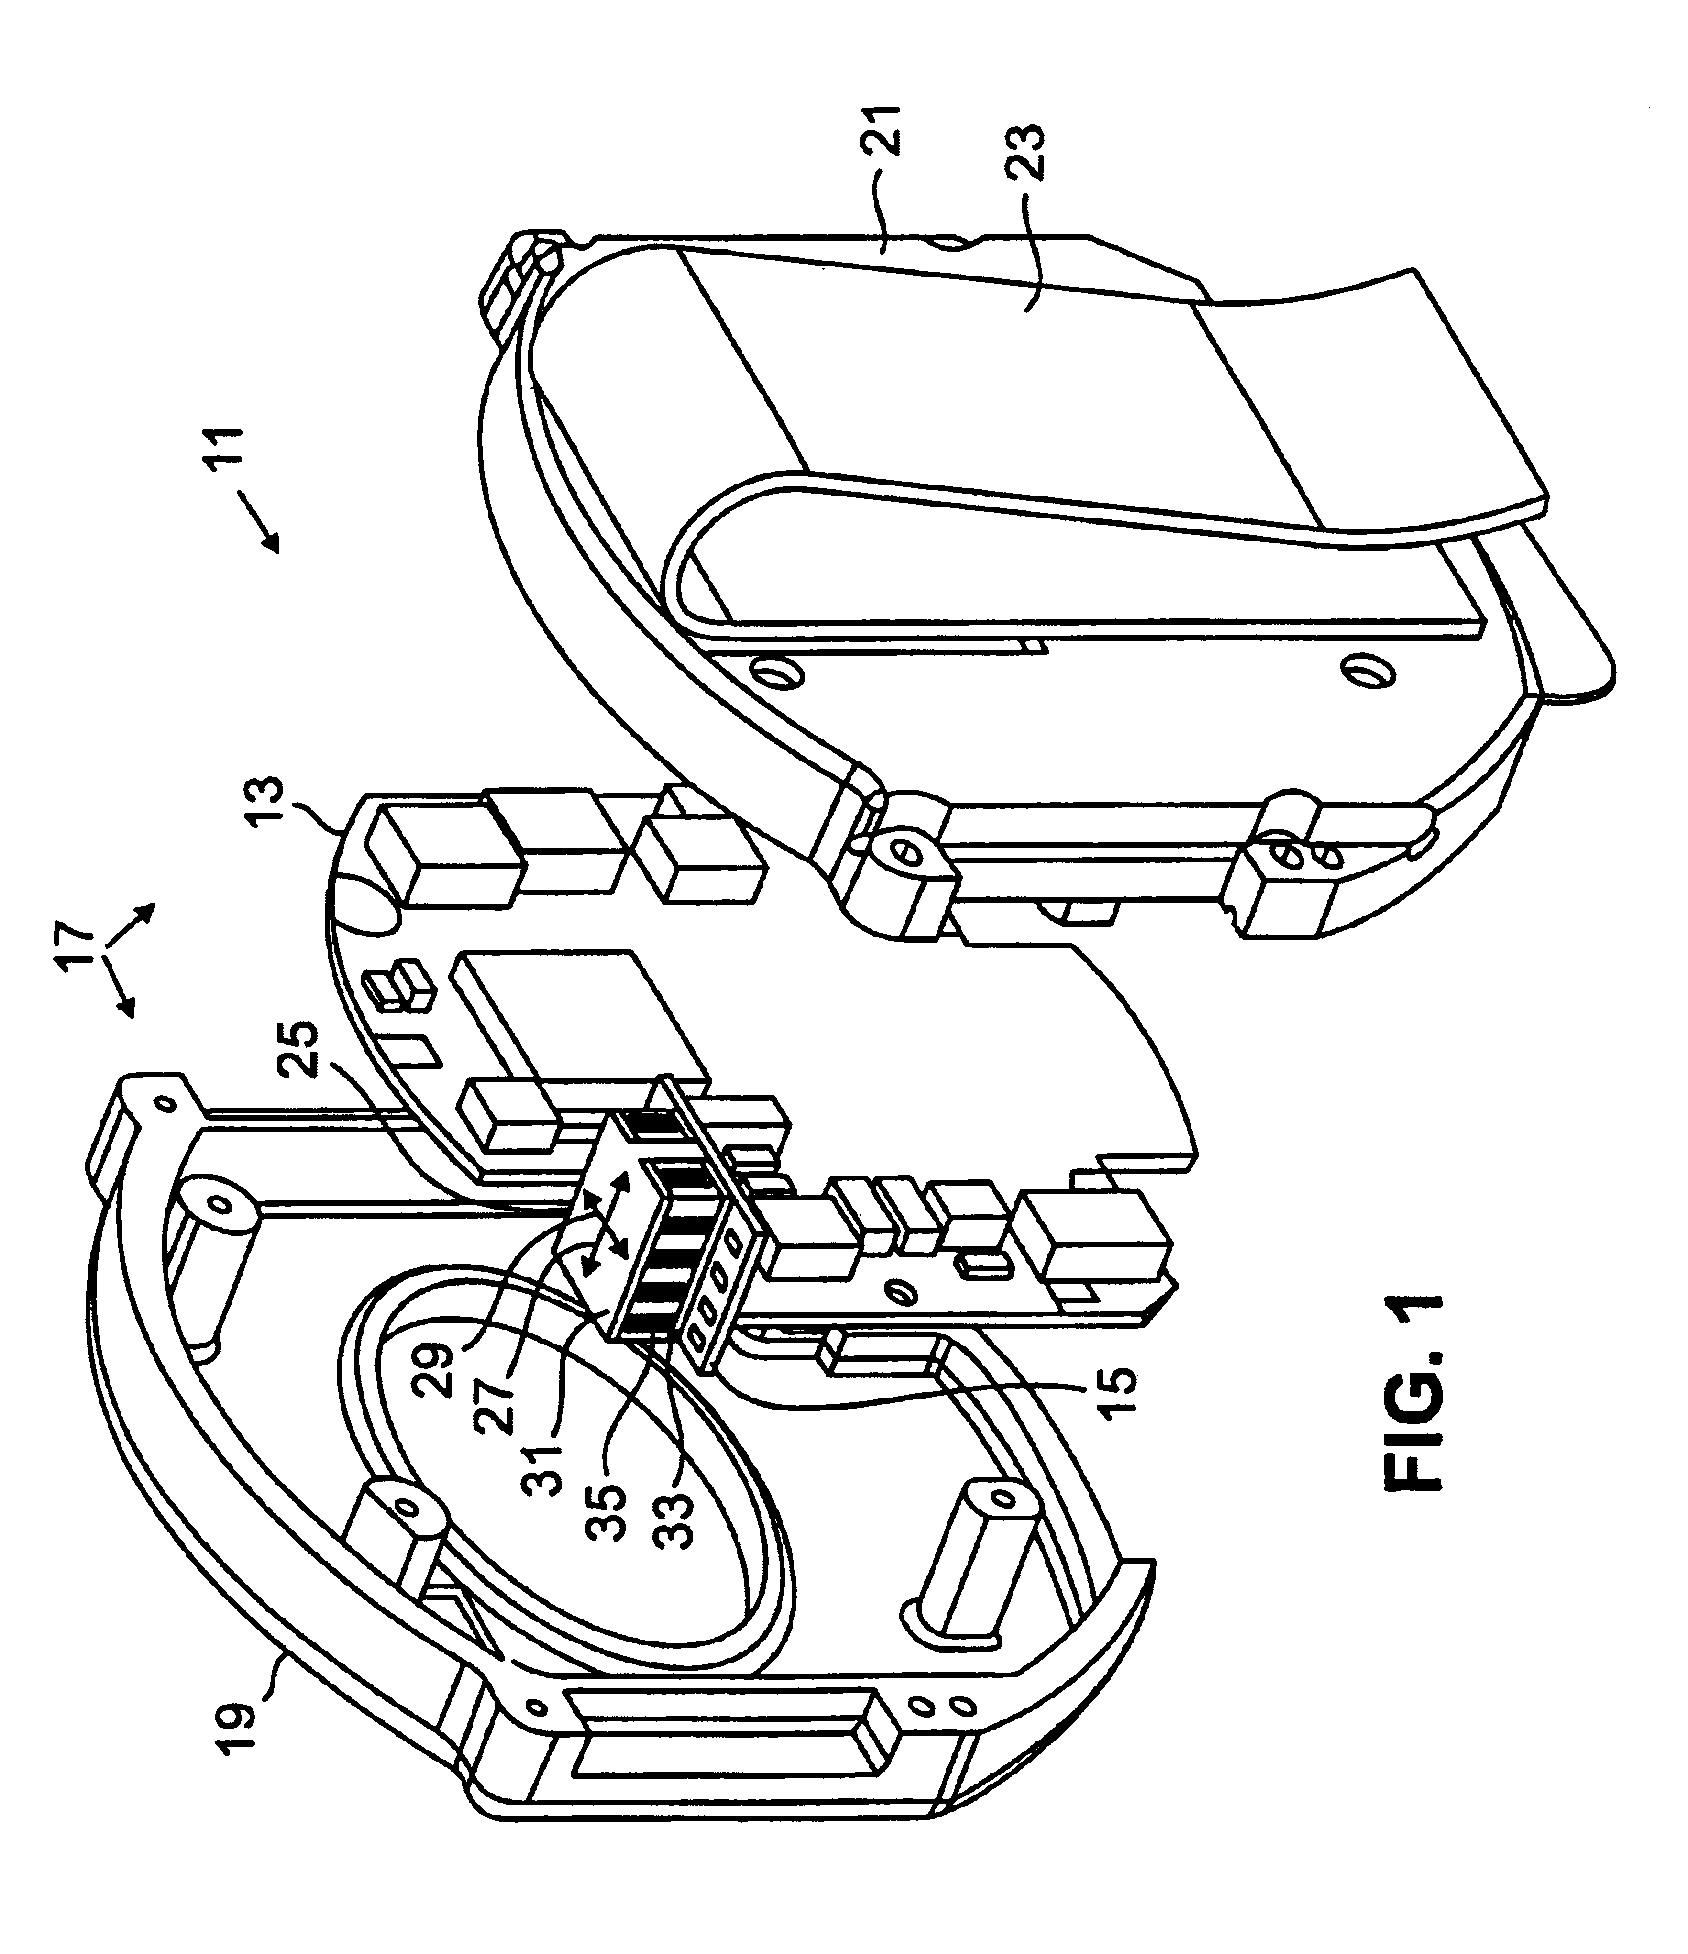 System and method for analyzing activity of a body